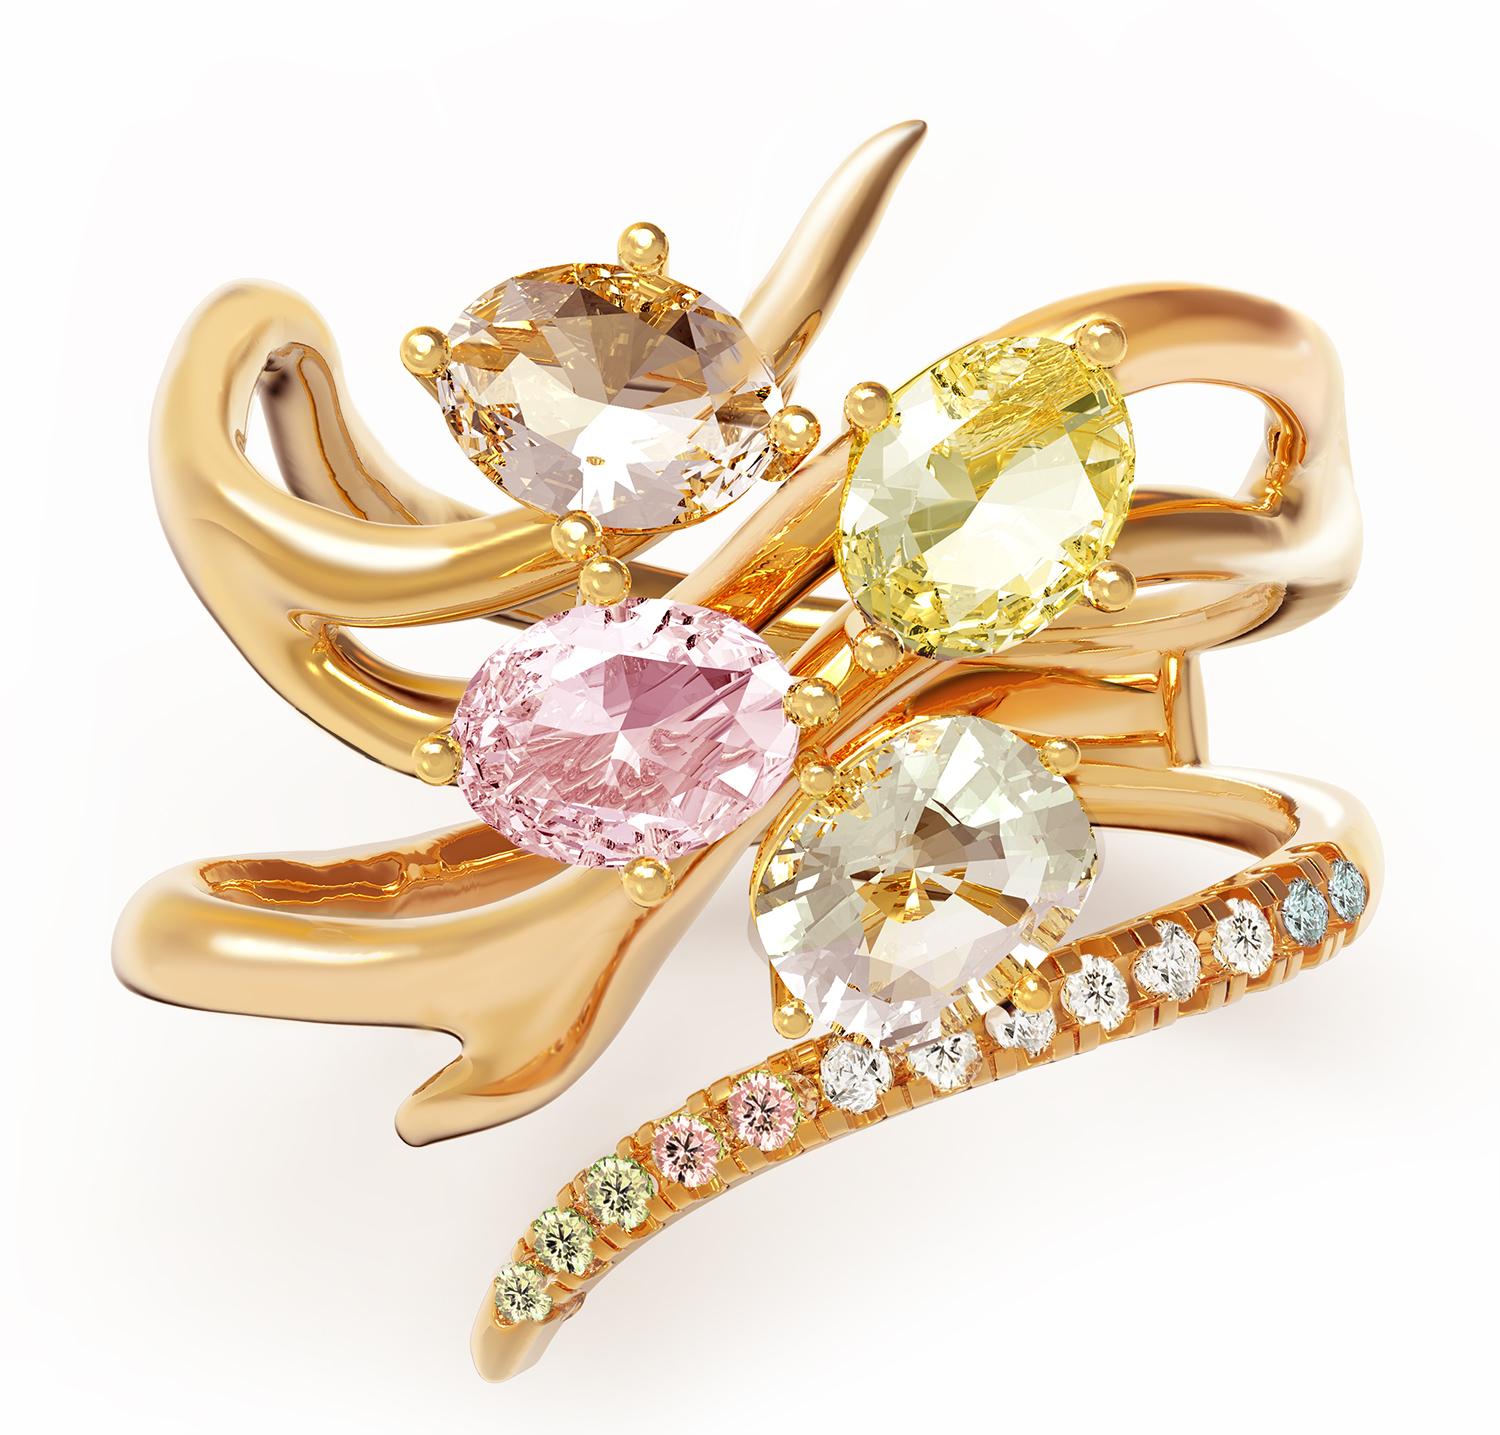 This Harajuku contemporary sculptural cluster ring is made of 18 karat yellow gold with natural gems on your choice custom made.
The matching gems are:
Oval cut pink sapphire;
Yellow sapphire in oval cut;
Light smoky quartz in oval cut;
Minty light